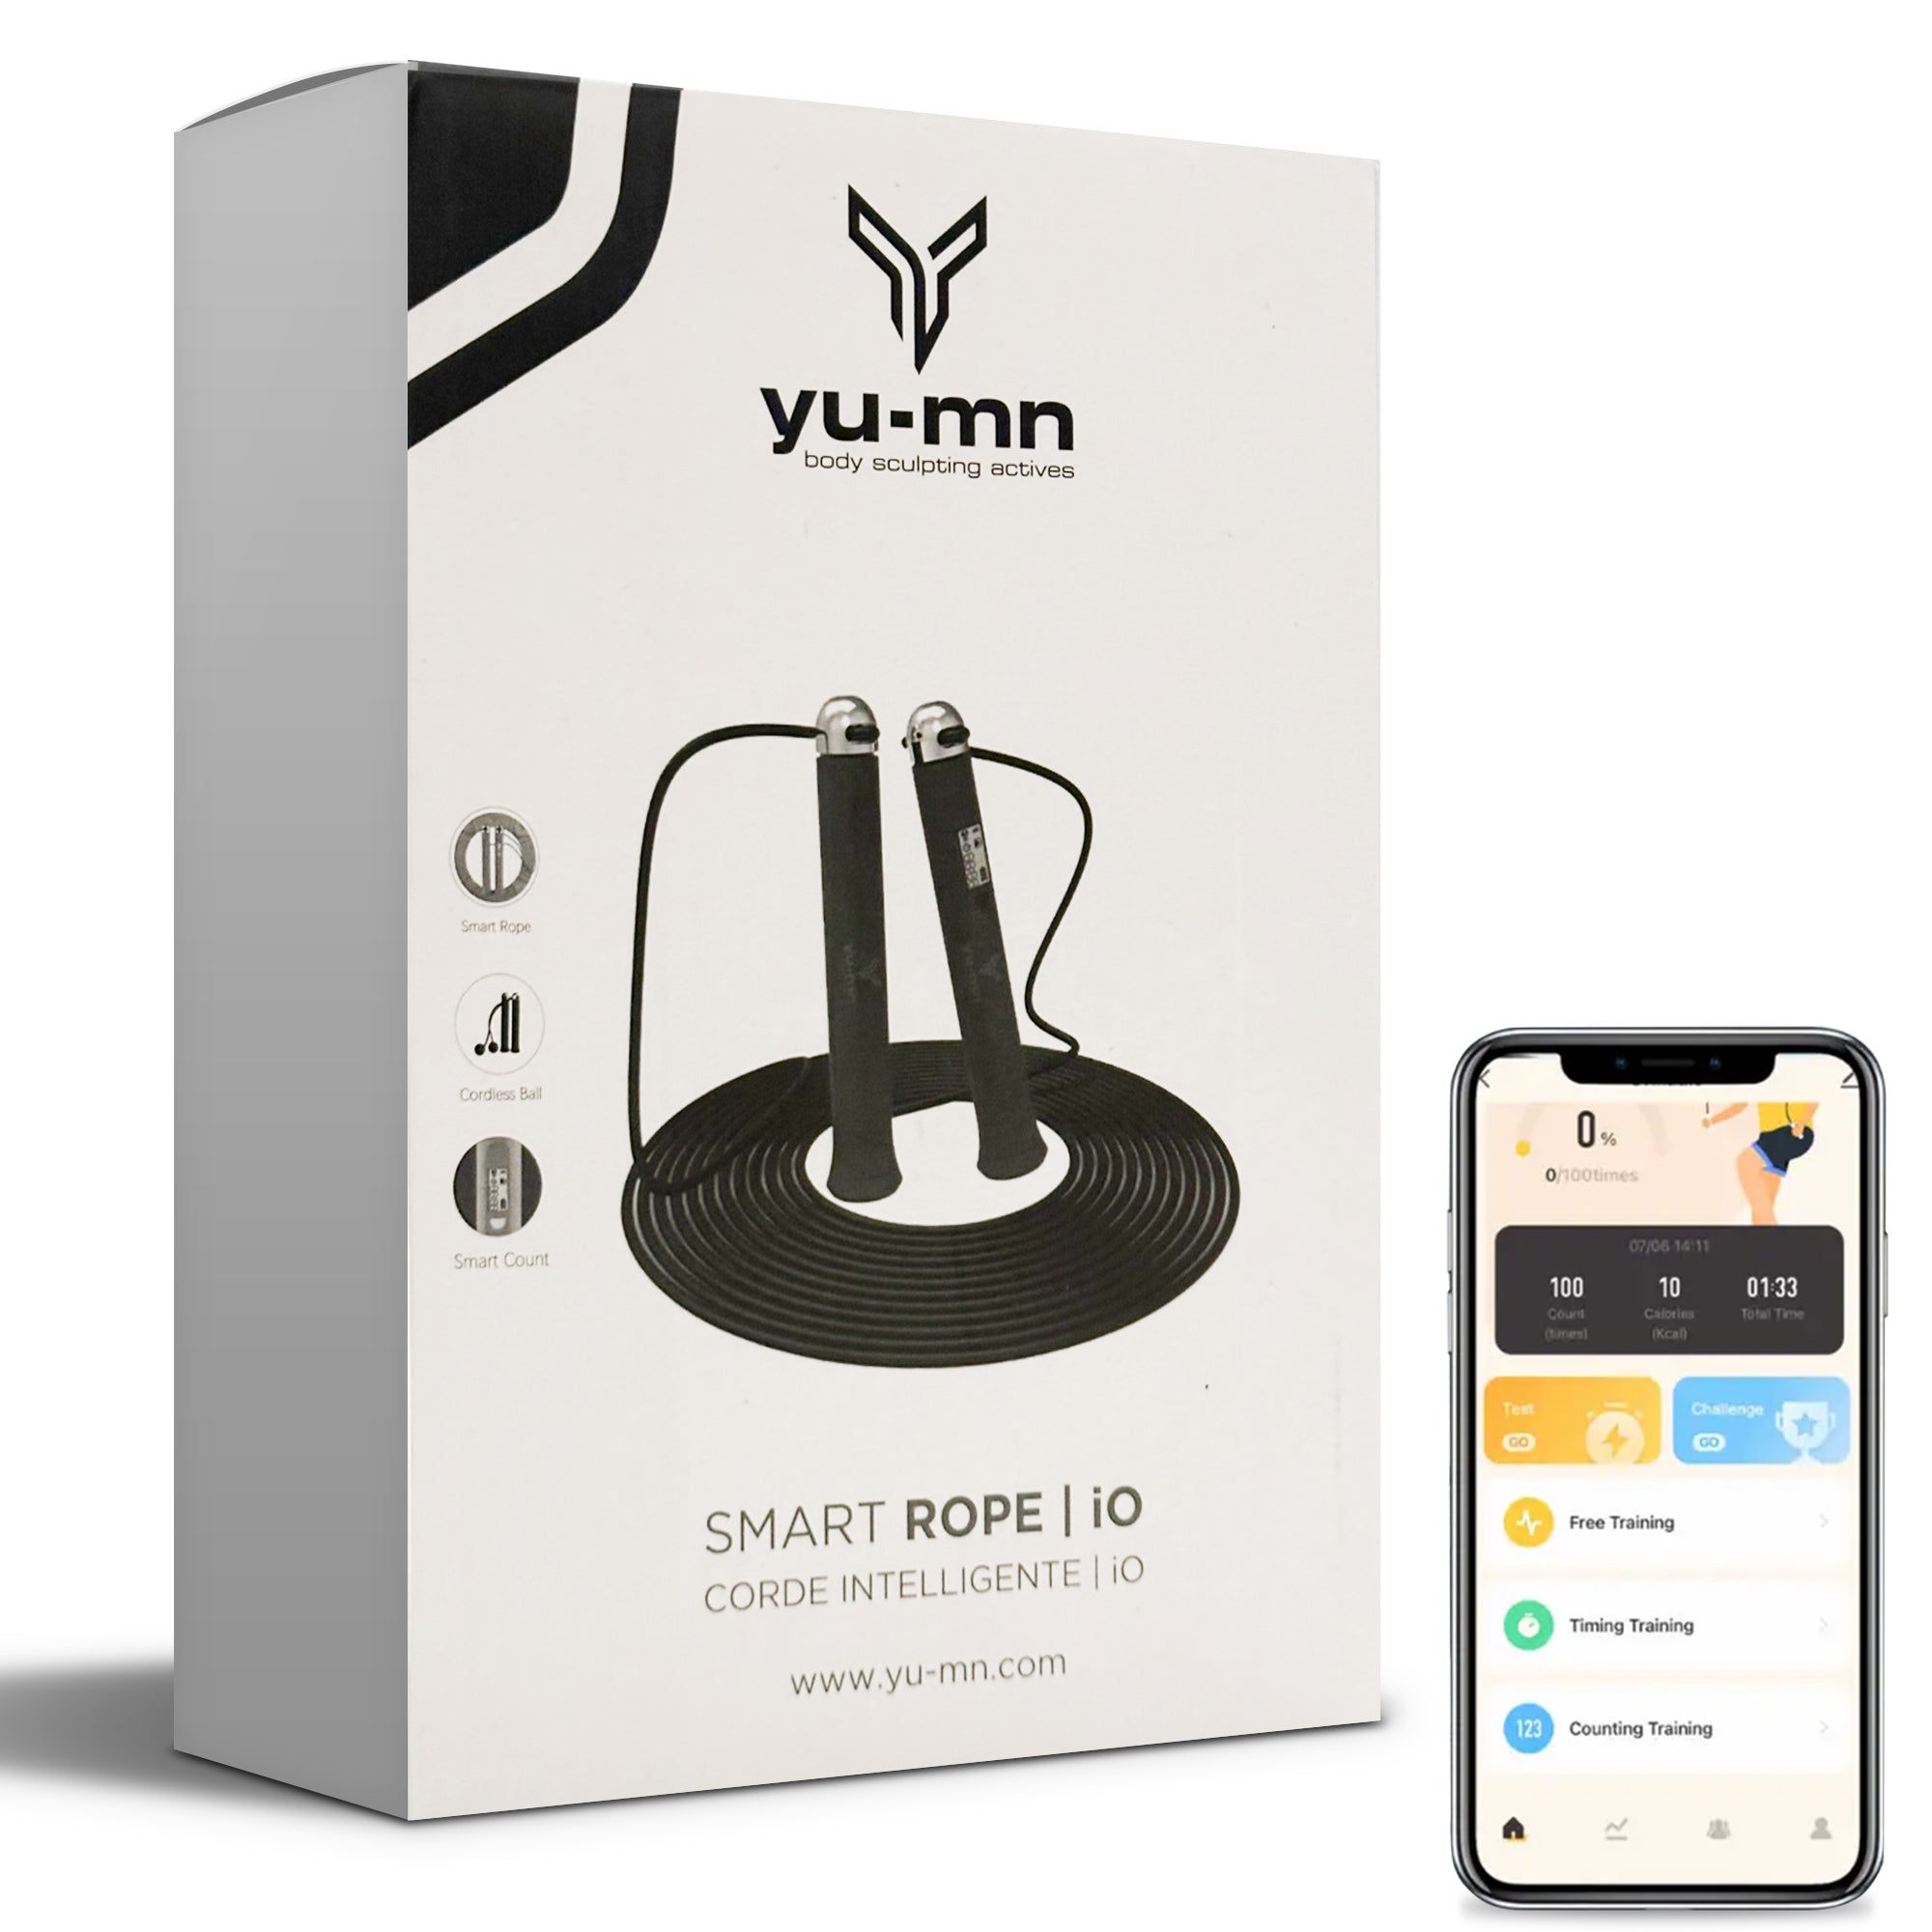 YU-MN SMART ROPE iO - Available in CA - Yu-mn